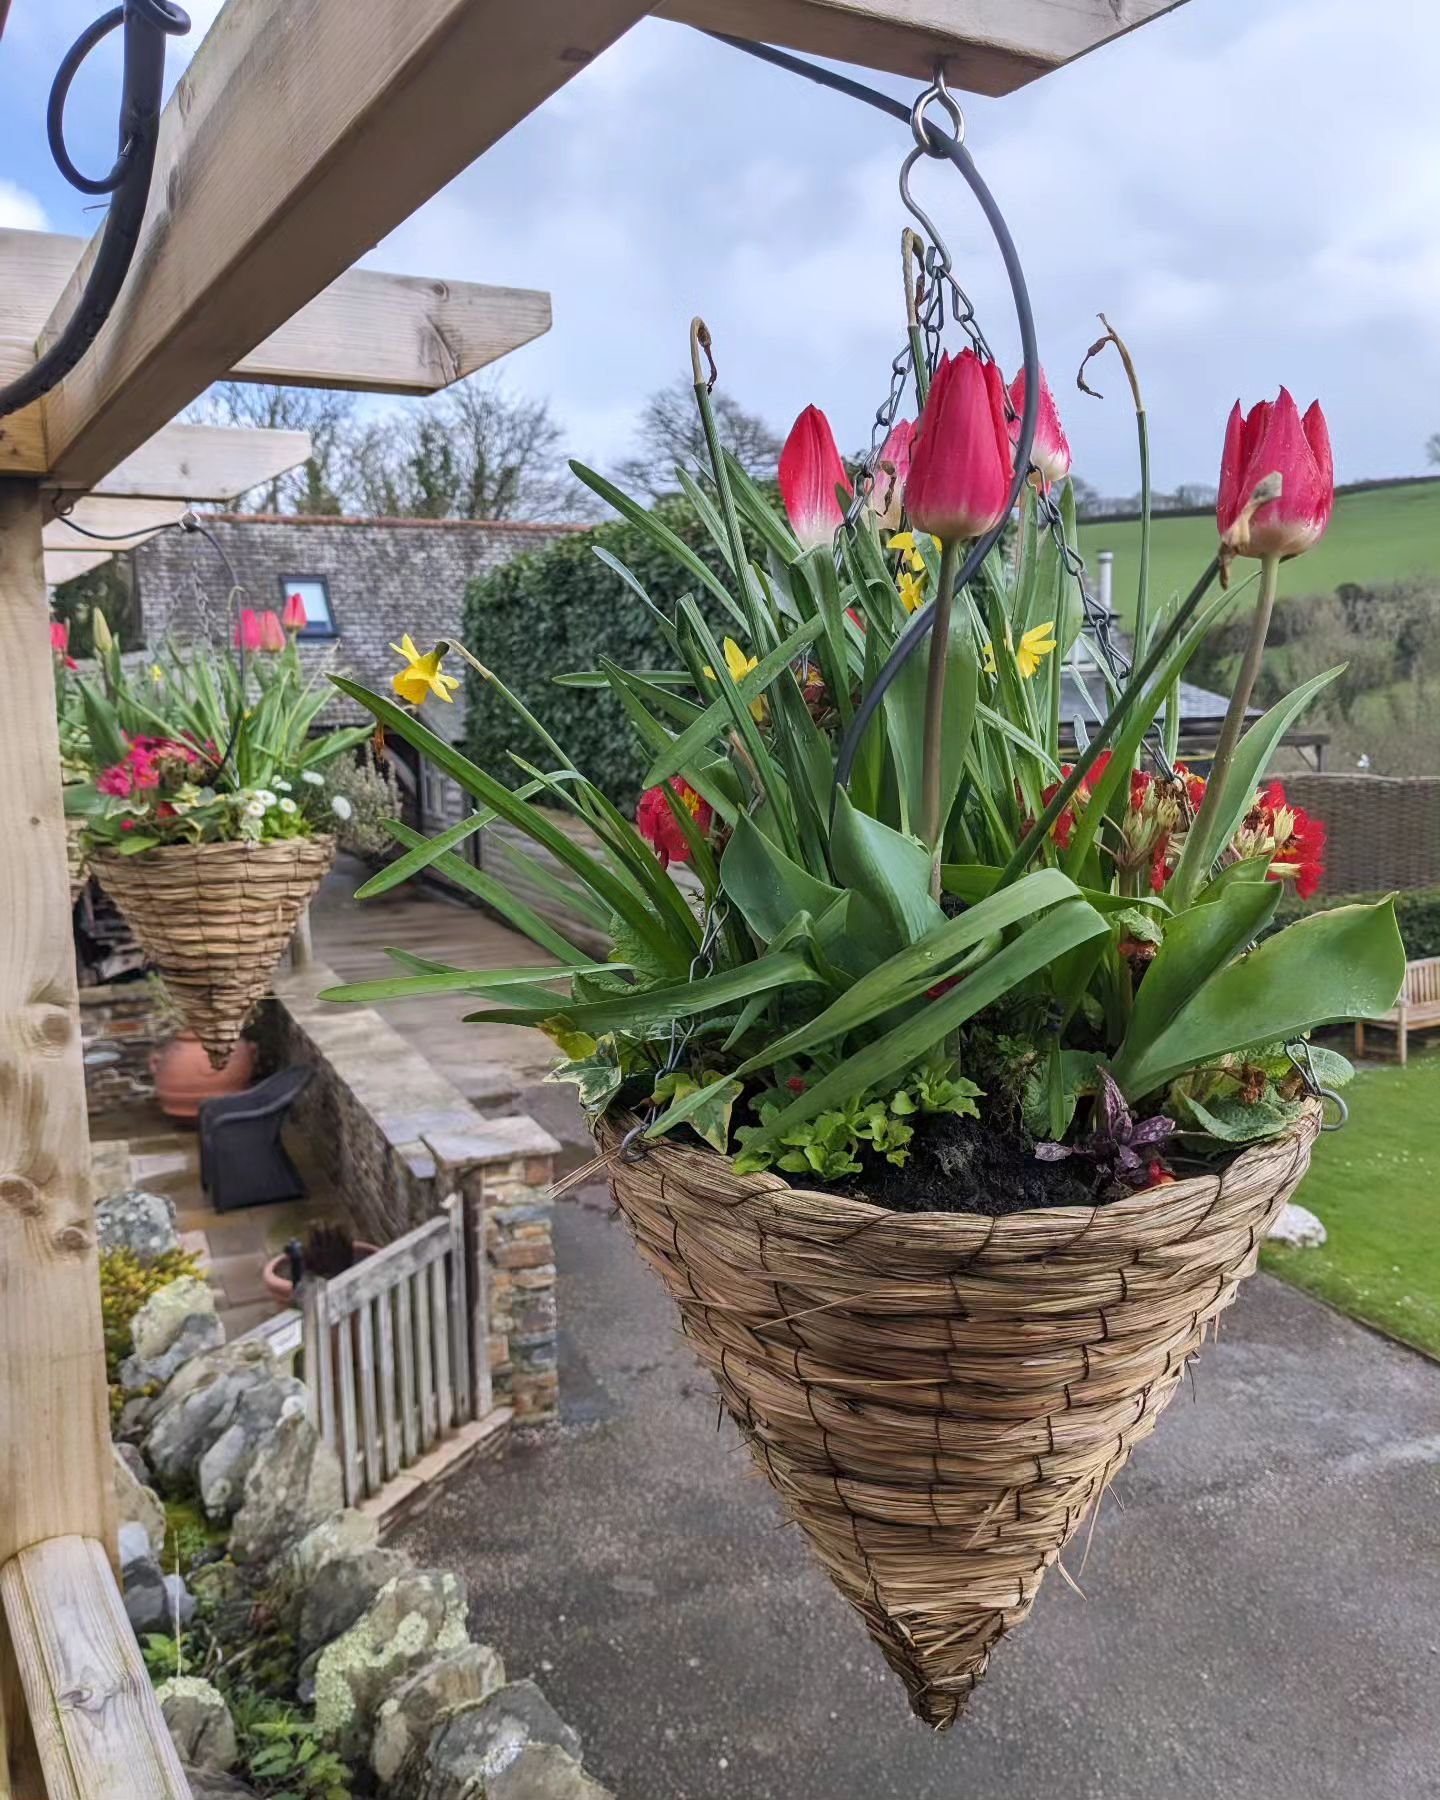 🌷
Spring has sprung at Flear Farm Cottages for your 2024 holiday destination!
Booking website 🔗 in bio

#southhams #ruralbreaks #Spring2024 #Springbreaks&nbsp; #tulipsofinstagram 
@premiercottages @aaratedtrips @tinytravelship @visitsouthdevon